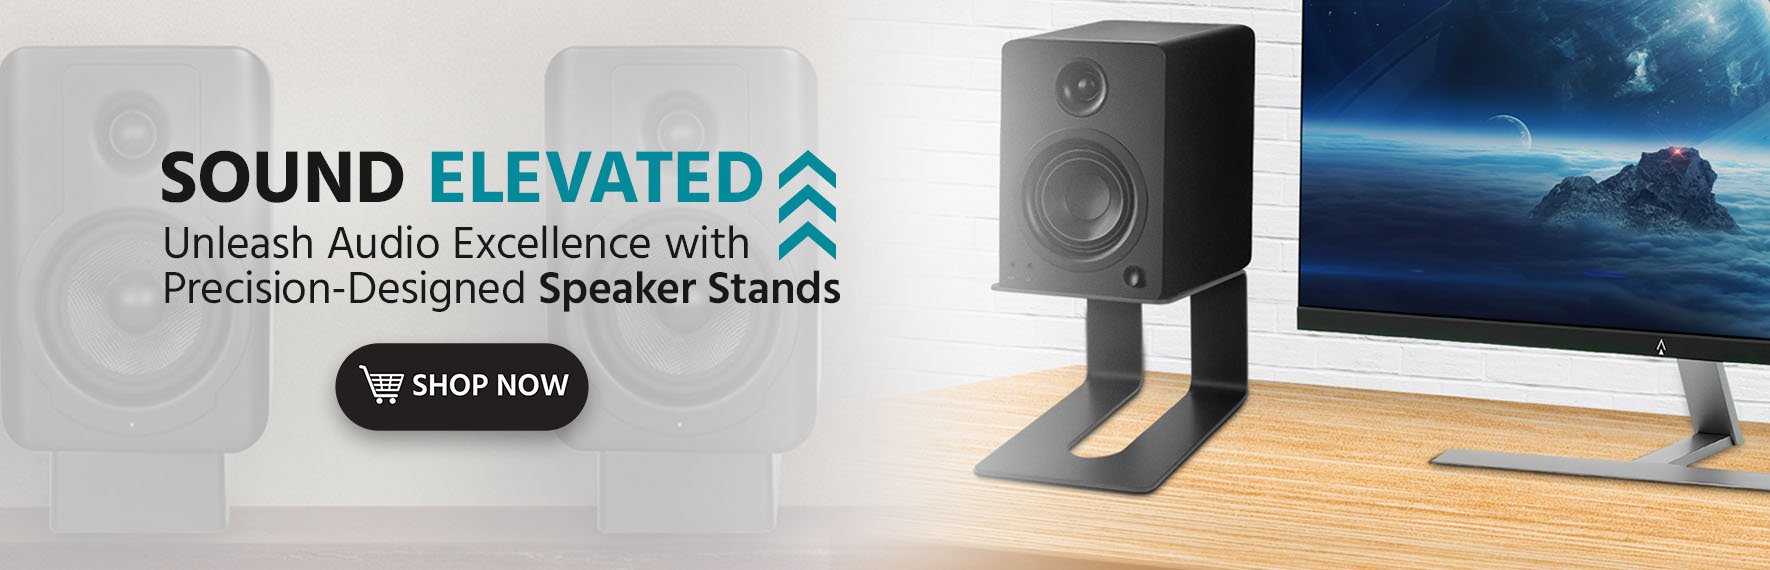 Raise Your Sound, Elevate Your Space: Introducing Speaker Stands & Risers Redefining Audio Excellence! Free Standard US Shipping Shop Now"